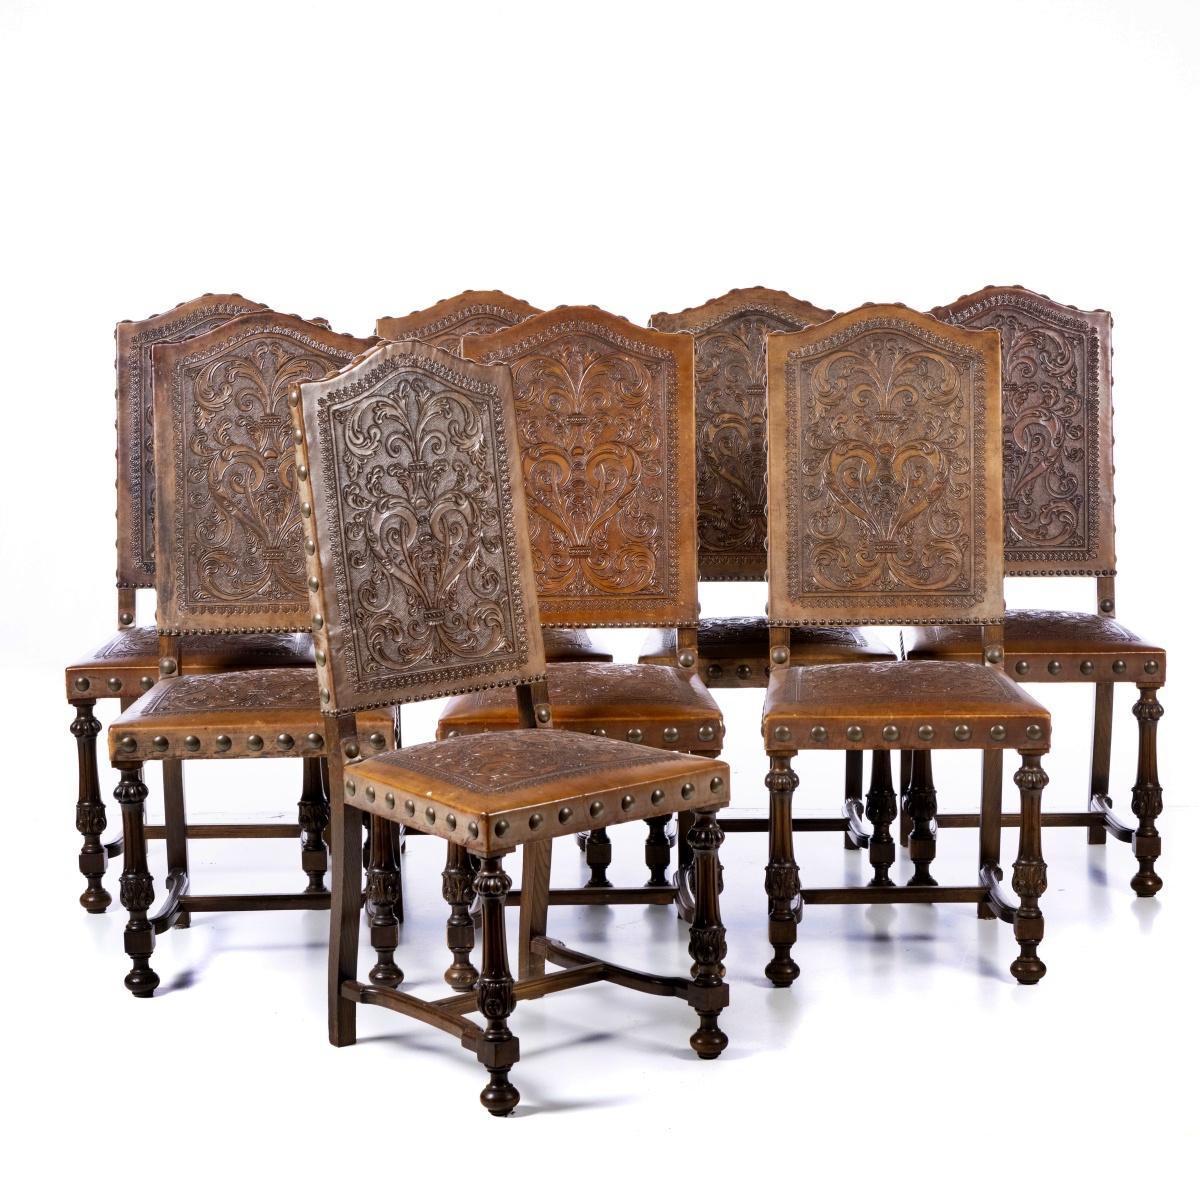 Hand-Crafted Set of 8 Portuguese Chairs Begin, 20th Century